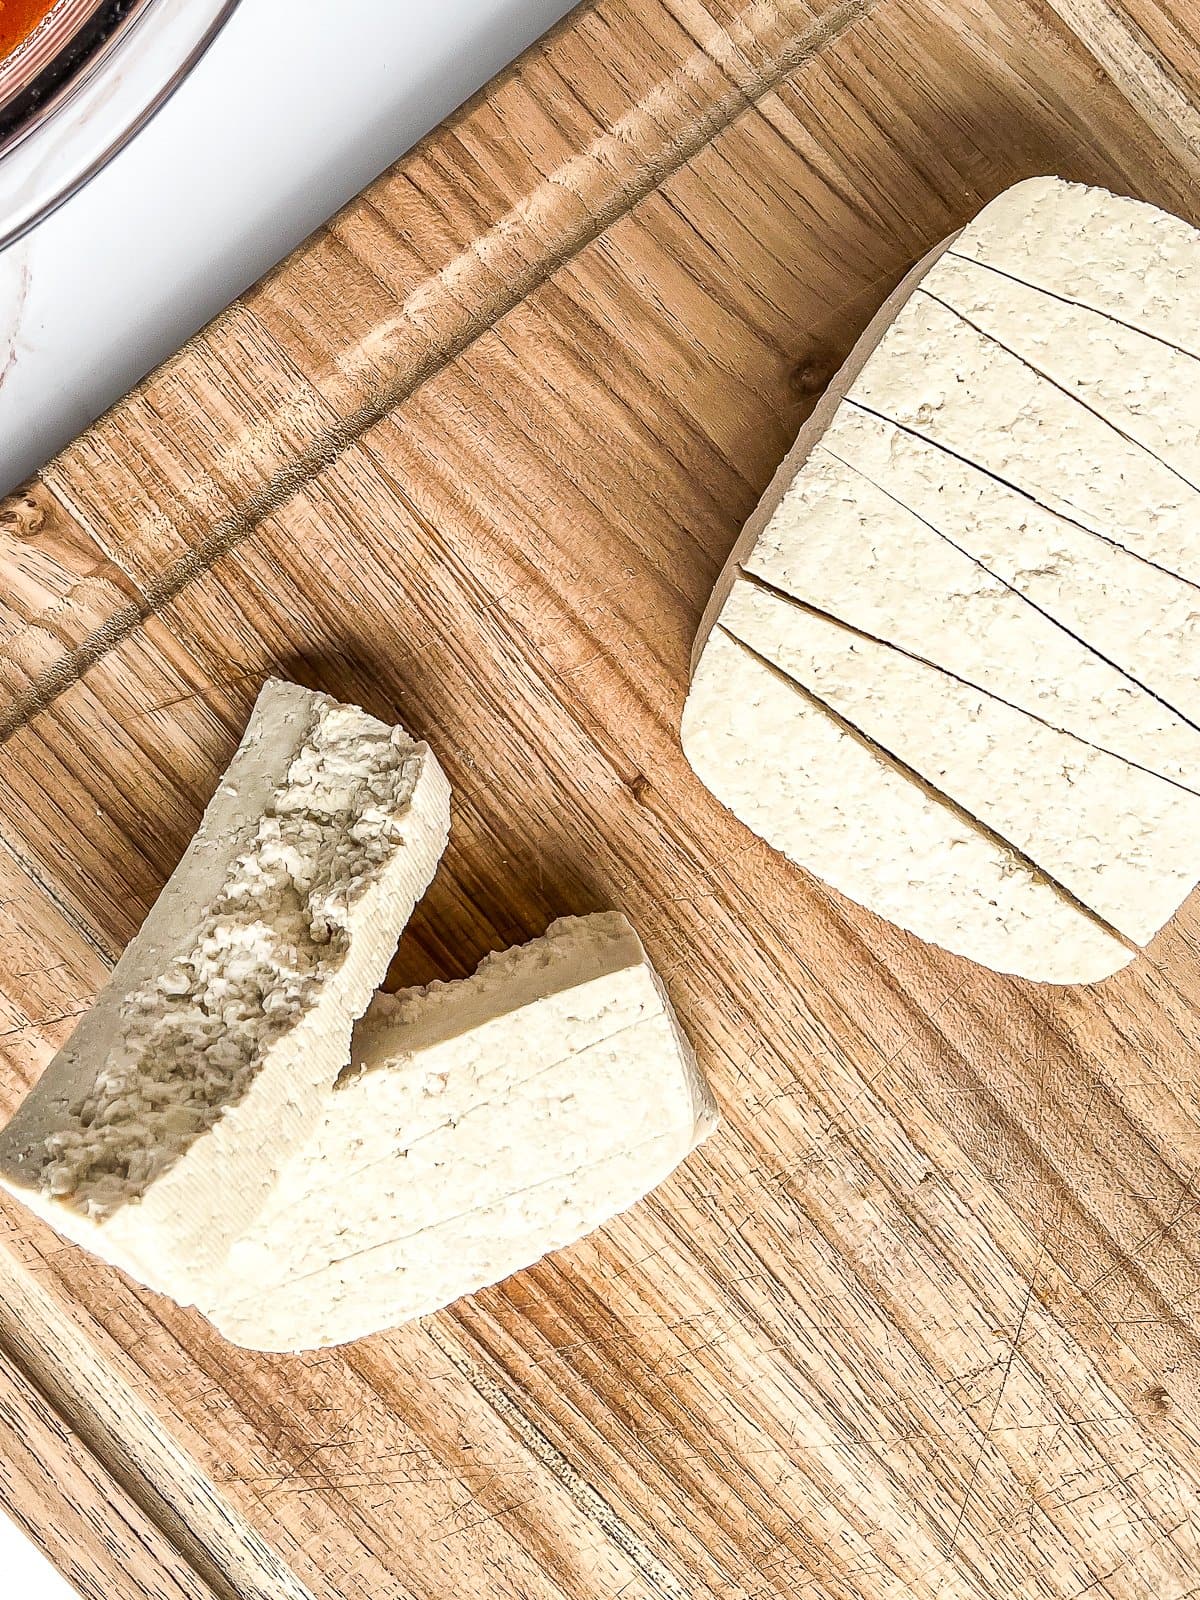 Close-up image of tofu scored into wedges and some tofu that has been ripped with irregular edges